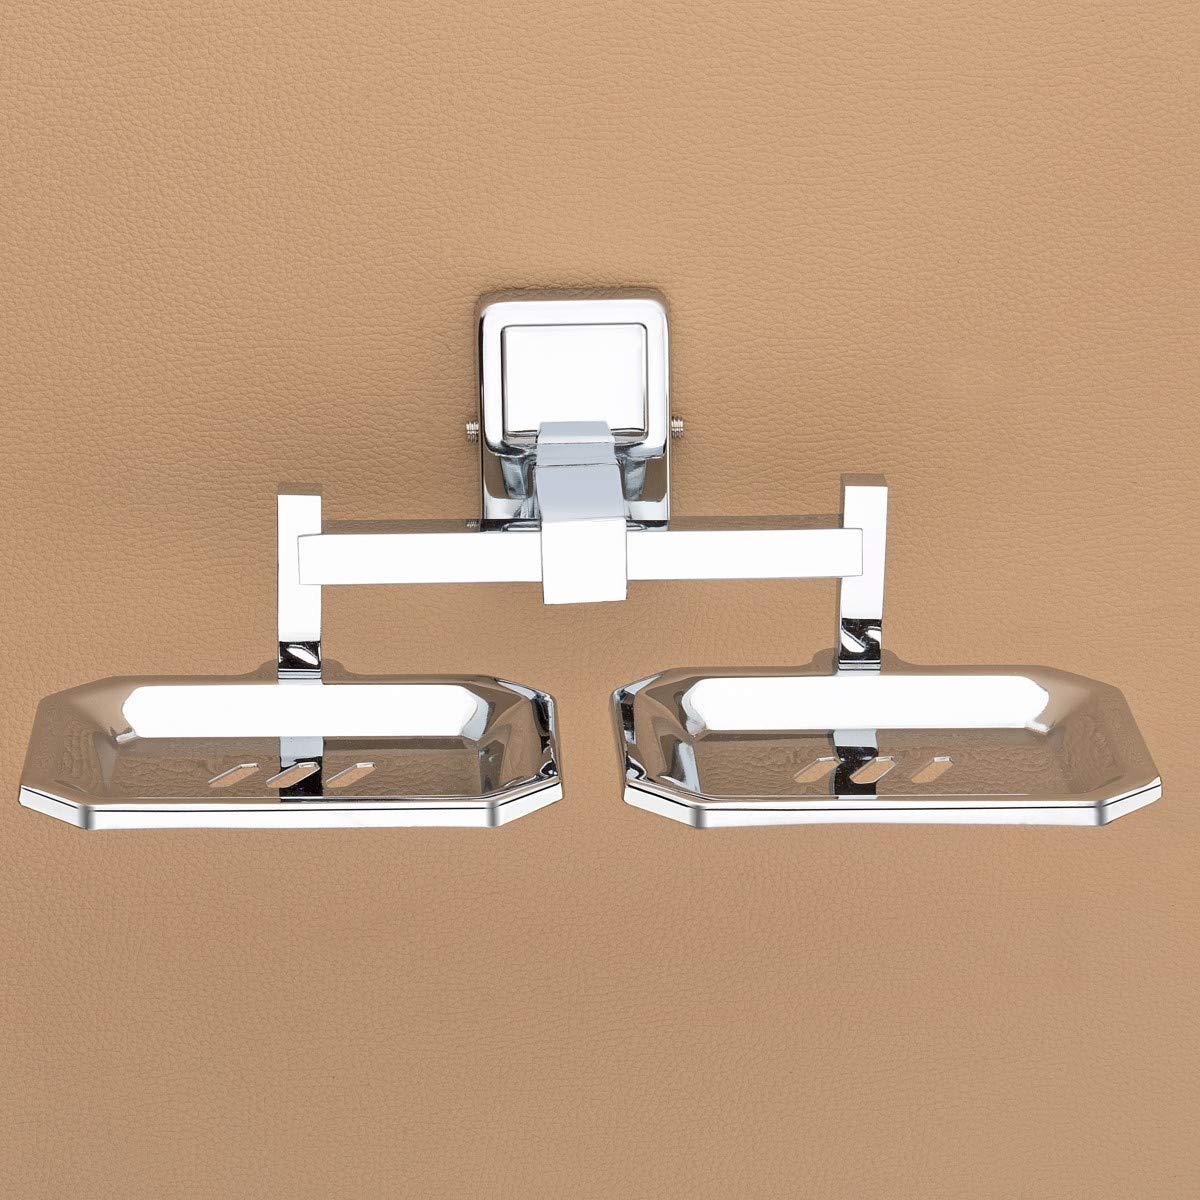 Plantex Stainless Steel 304 Grade Darcy Soap Holder for Bathroom/Soap Dish/Bathroom Soap Stand/Bathroom Accessories(Chrome) - Pack of 2